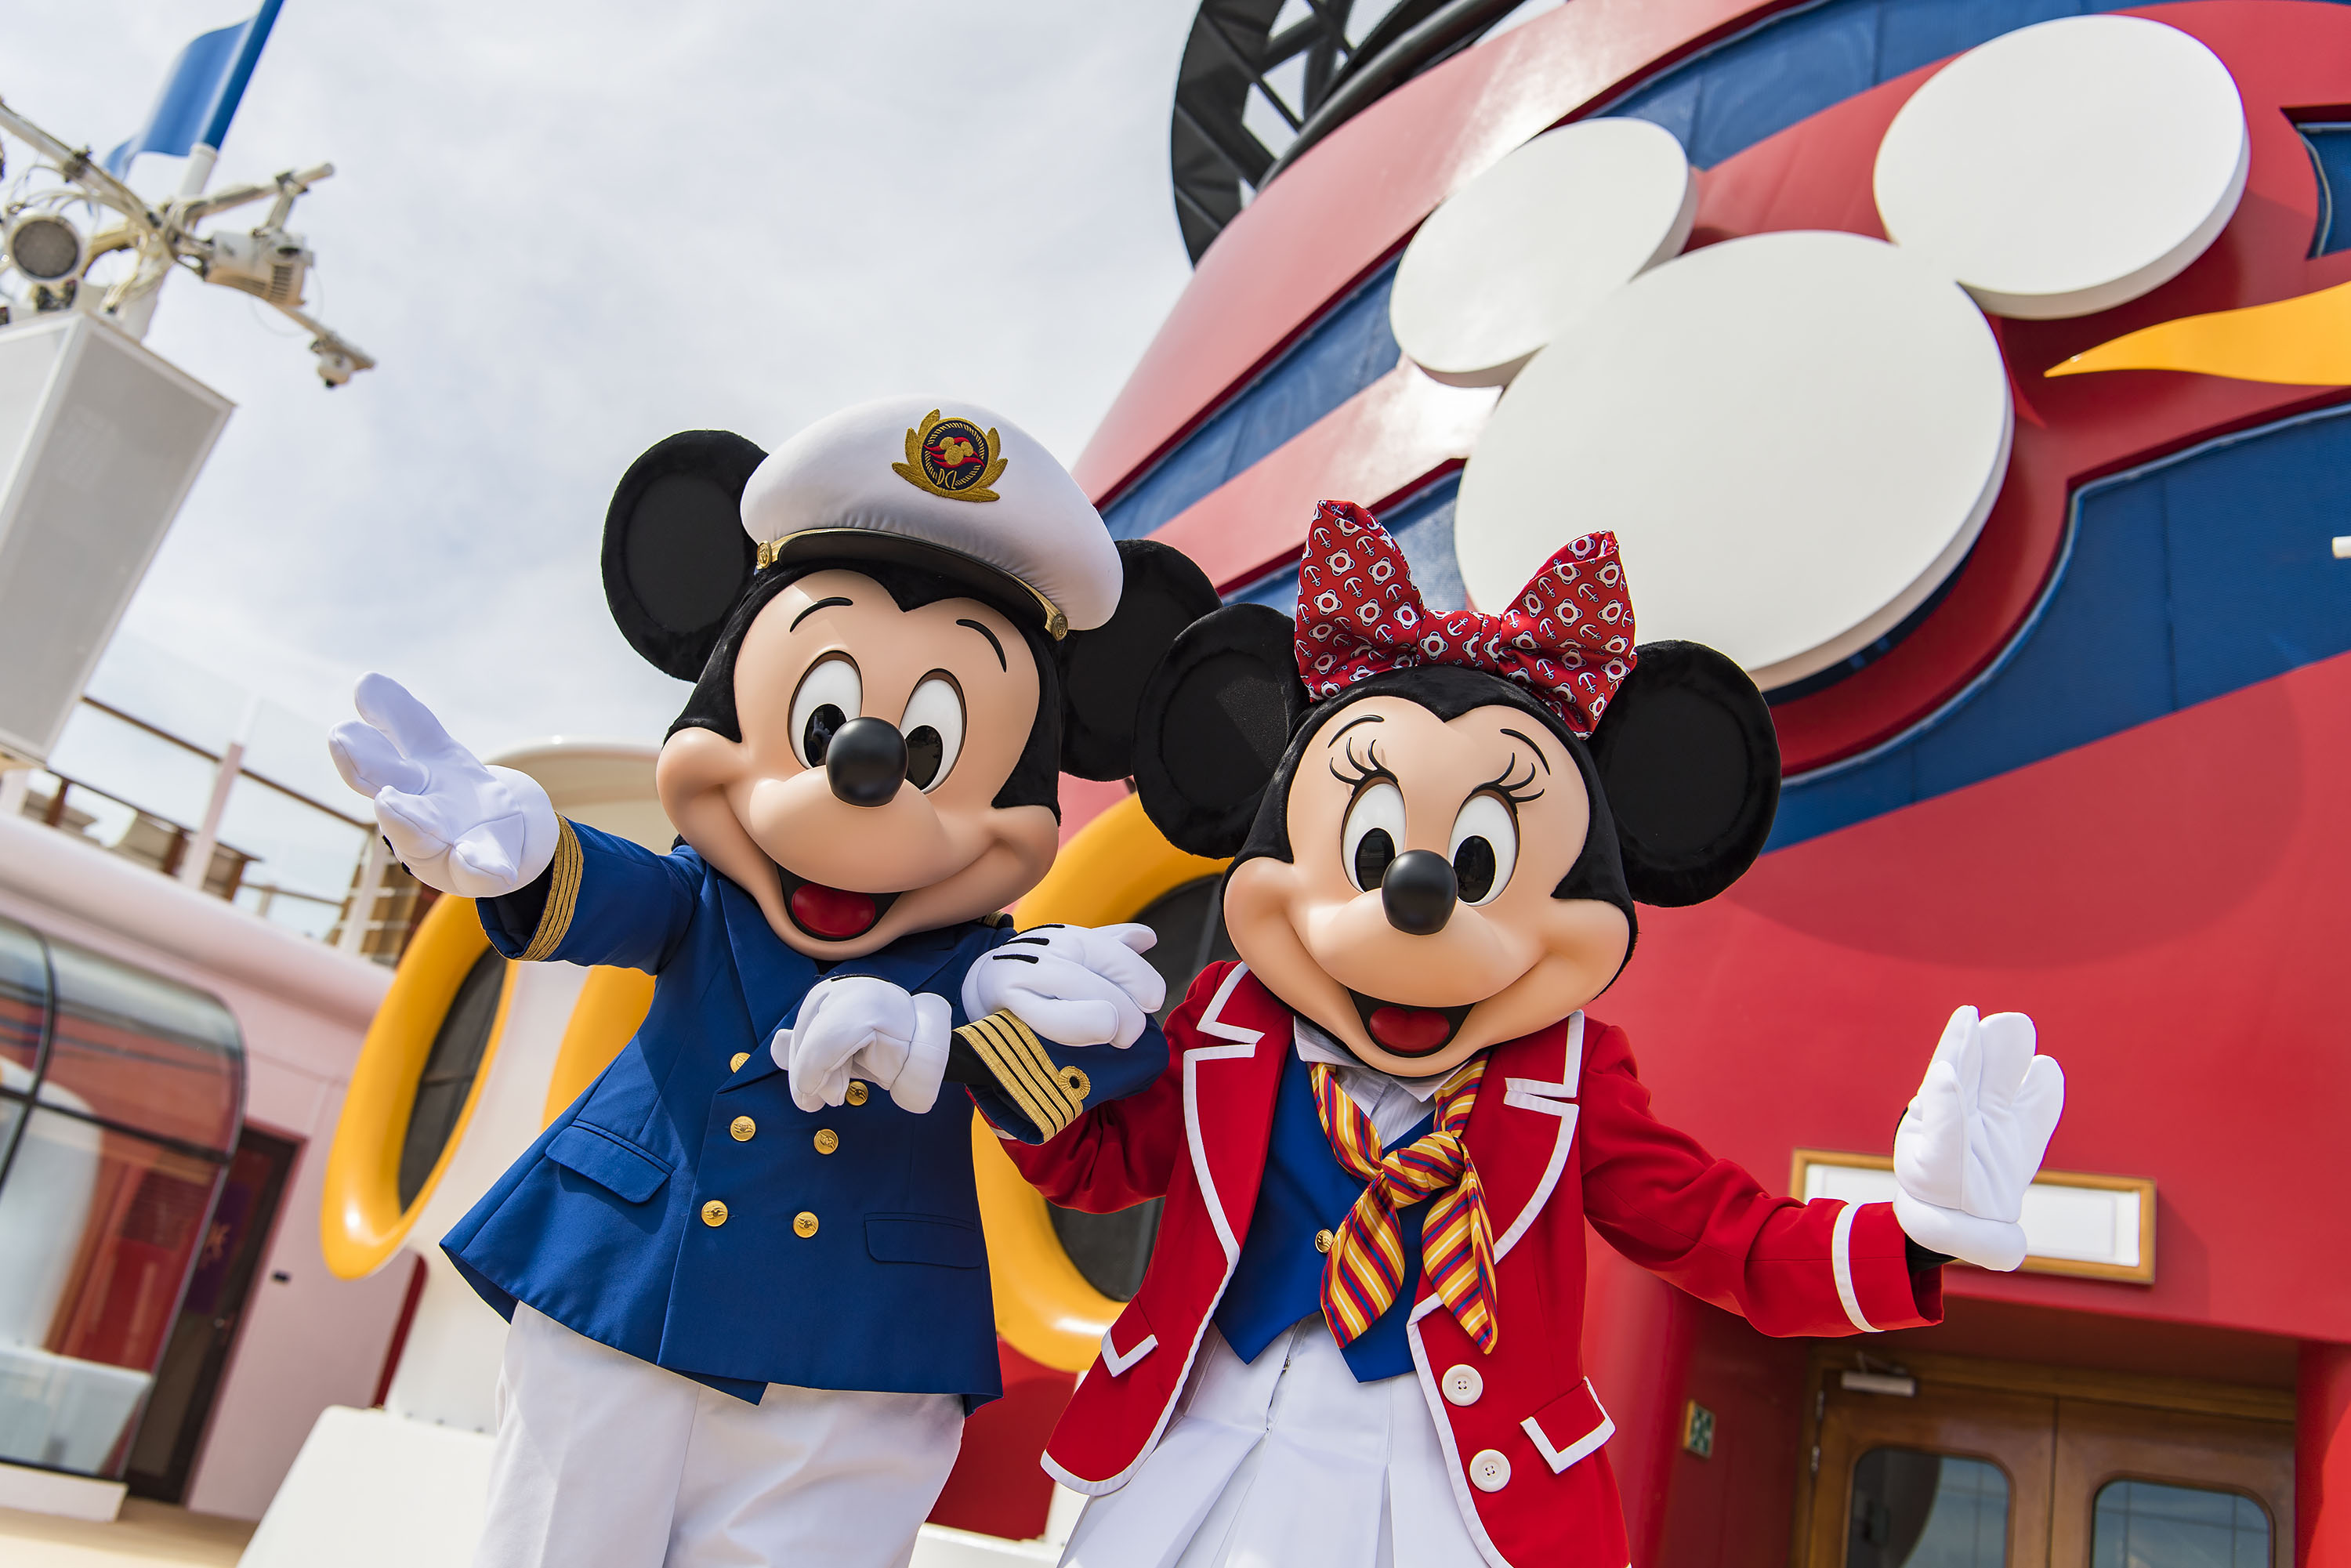 Captain Mickey and Minnie Mouse